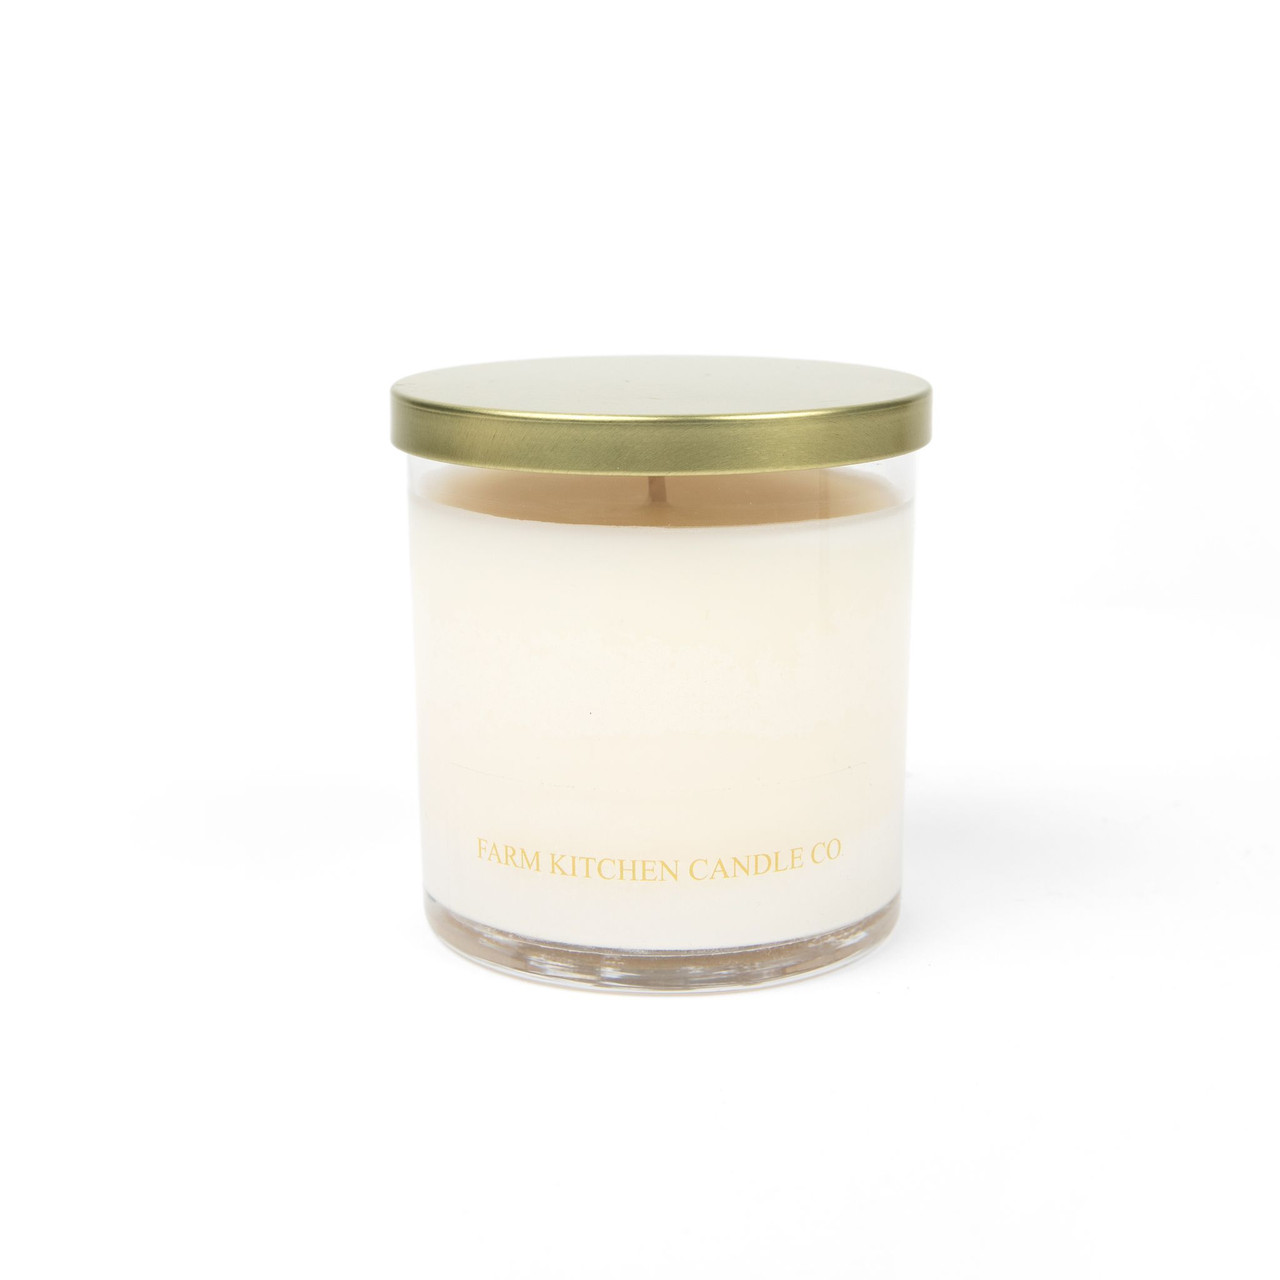 Month-to-Month luxury candle subscription, two candles a month